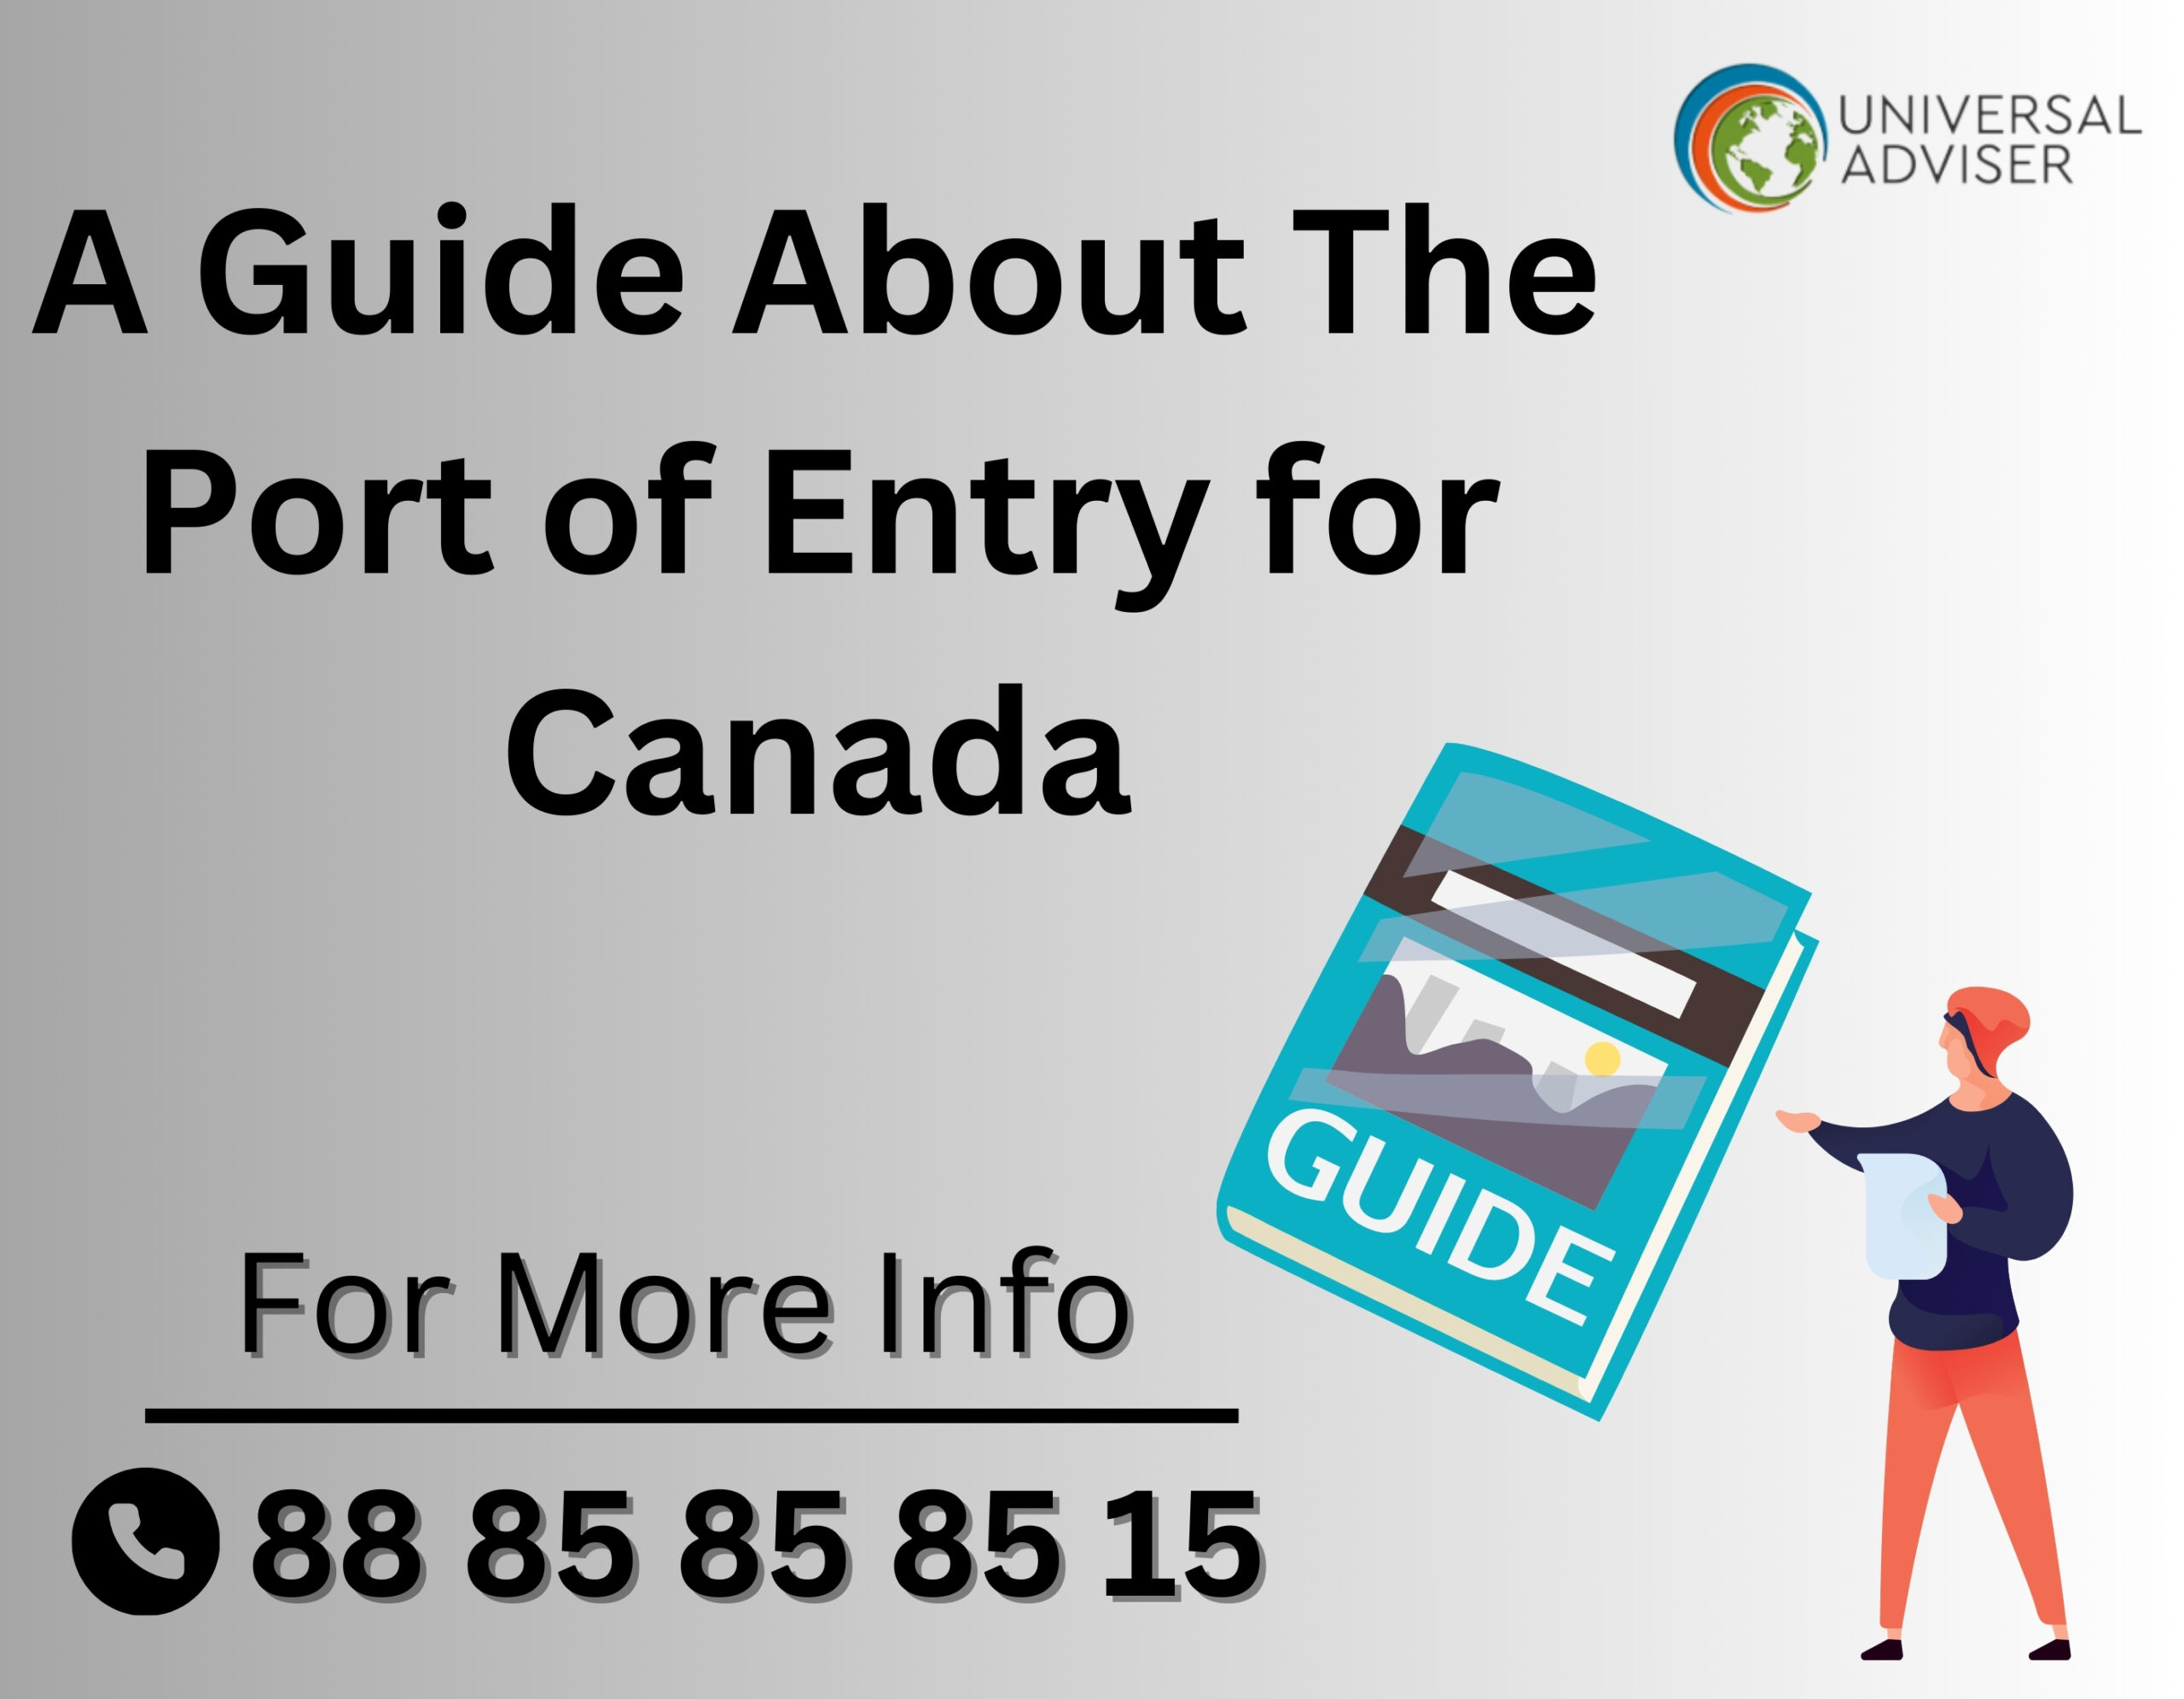 A Guide About The Port of Entry for Canada